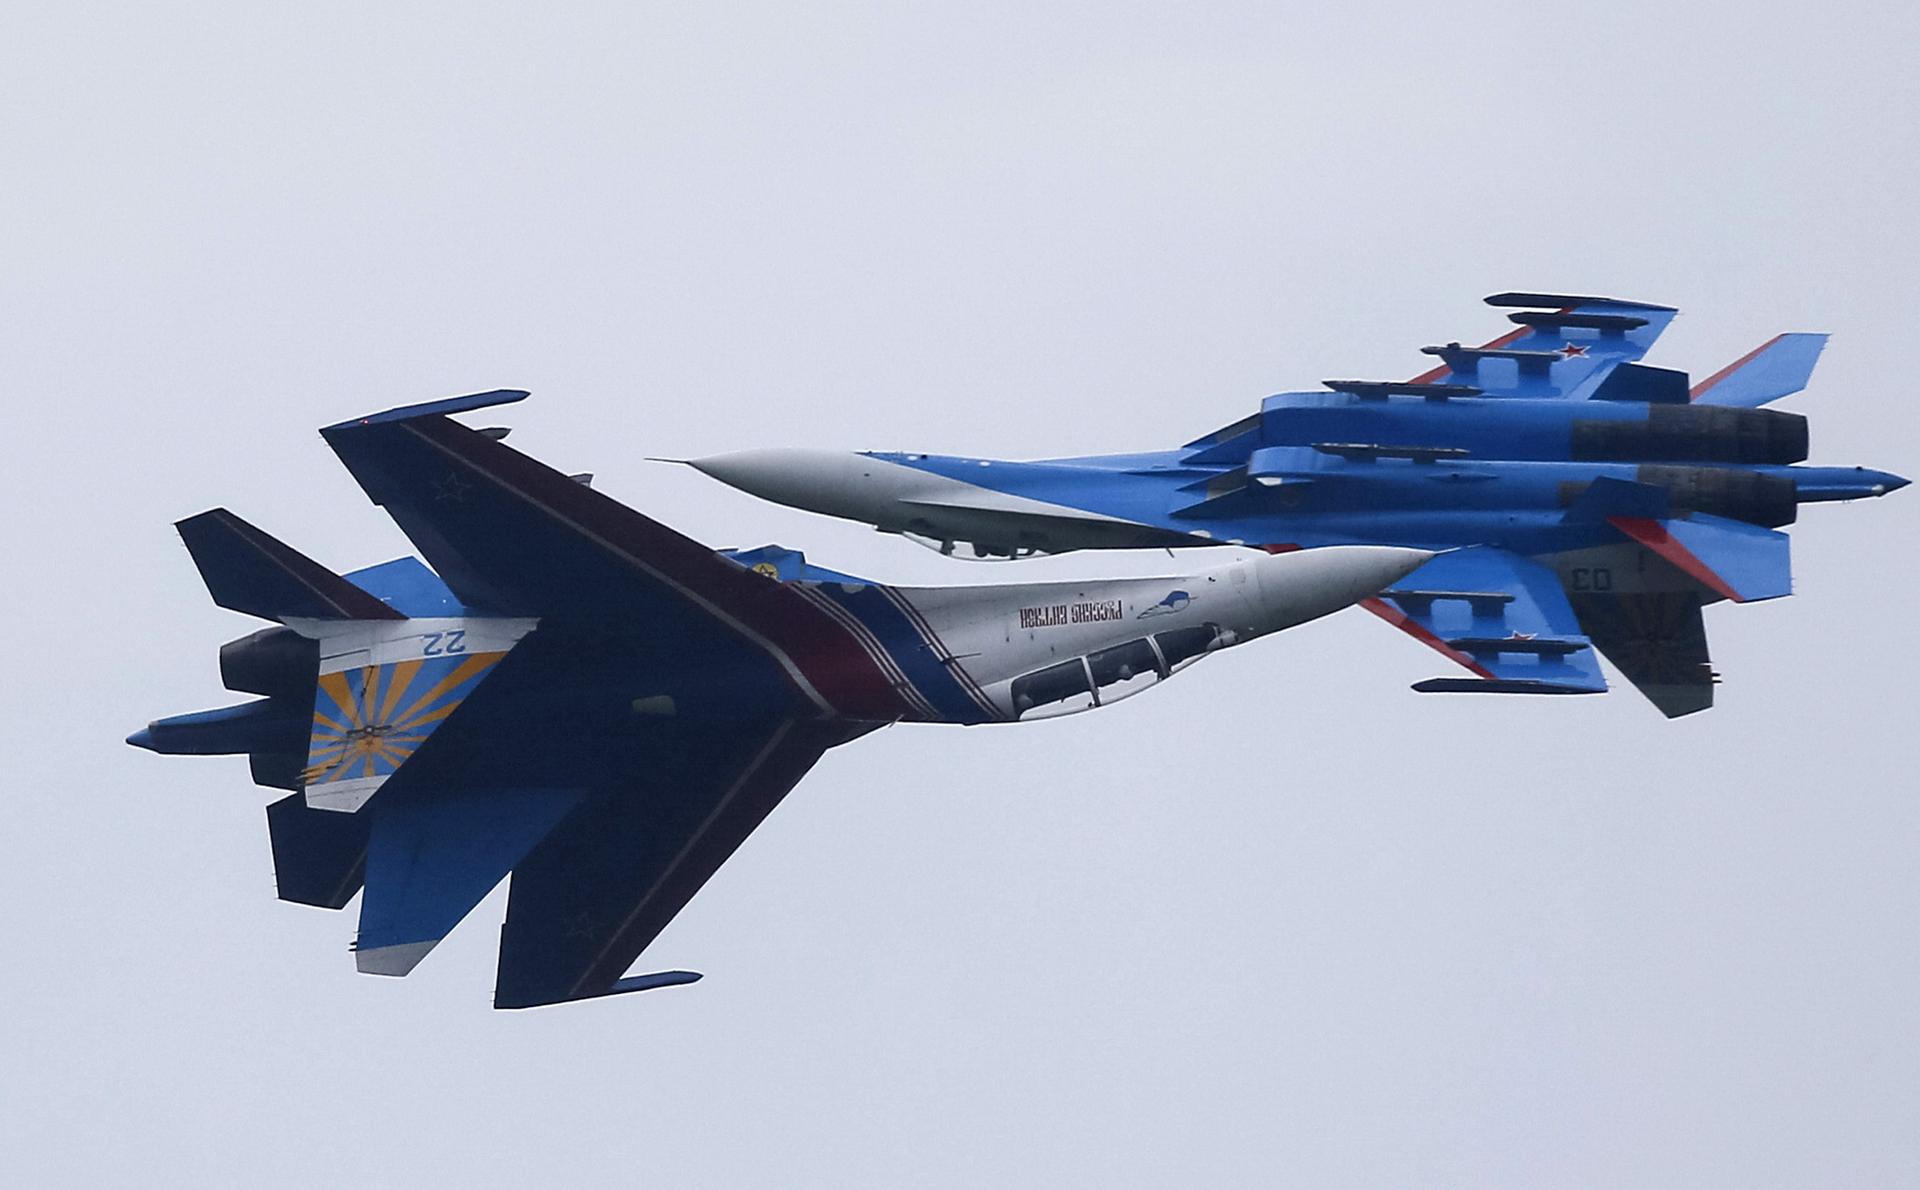 Sukhoi Su-27 Flanker fighters of the Russkiye Vityazi (Russian Knights) aerobatic show team are seen performing in 2015. Finland says Russian jets like these have probed its airspace.